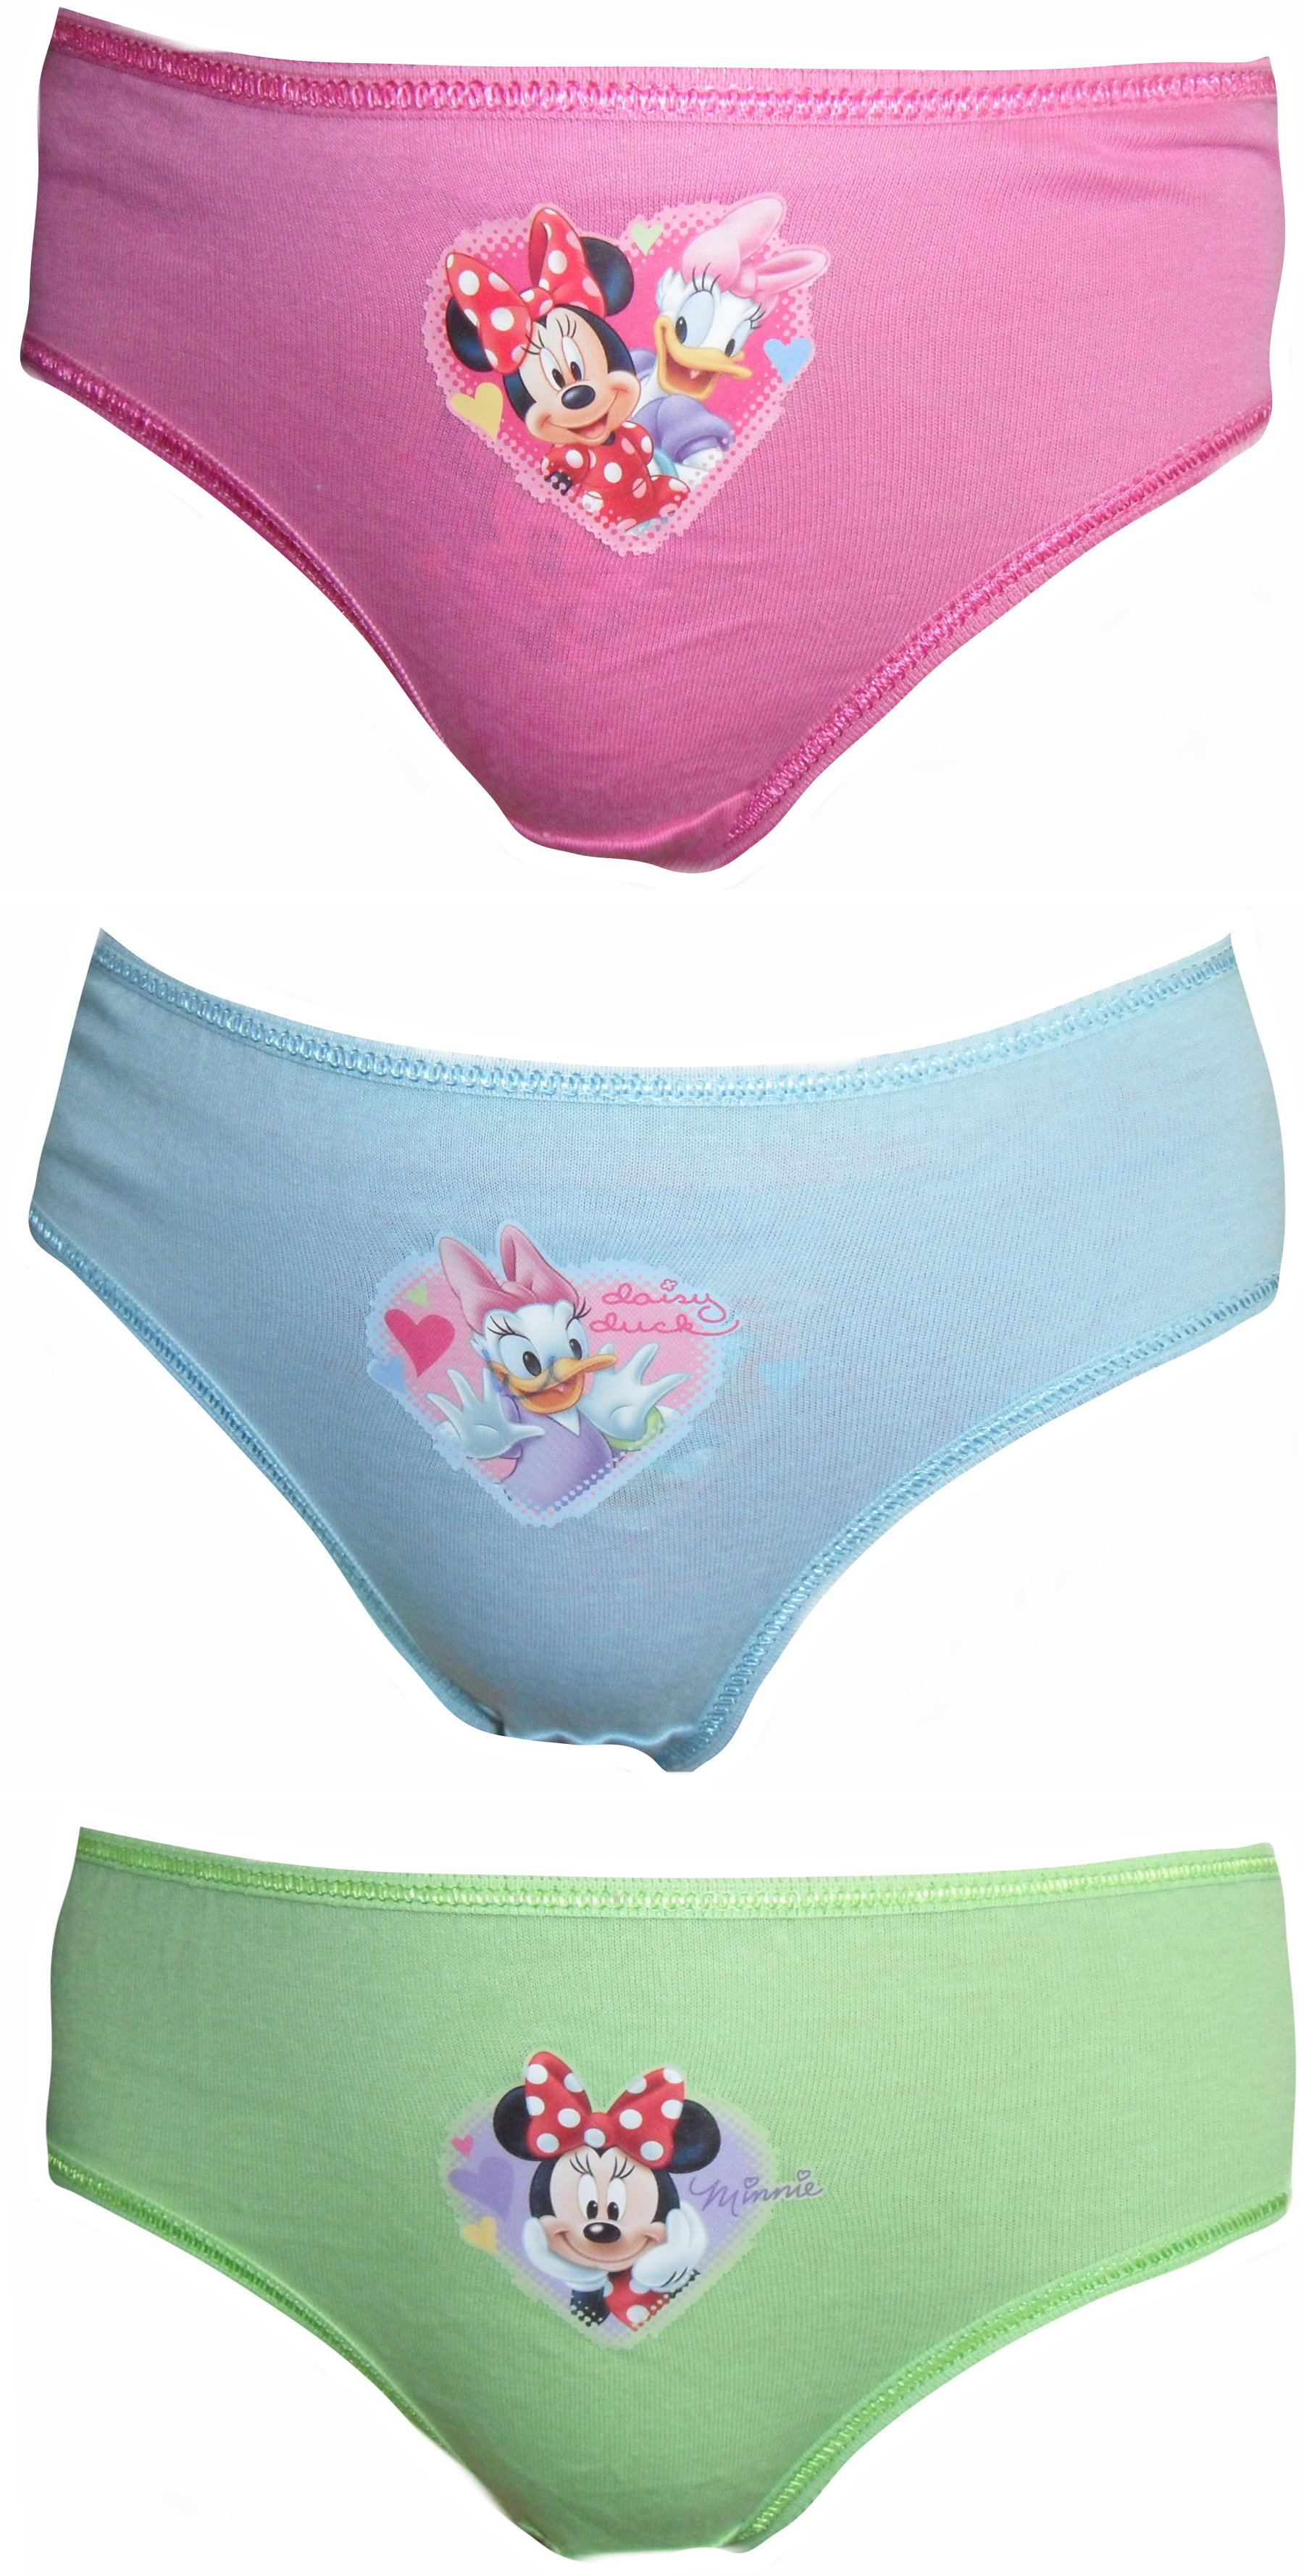 MInnnie Mouse Knickers GUW01A.jpg  by Thingimijigs